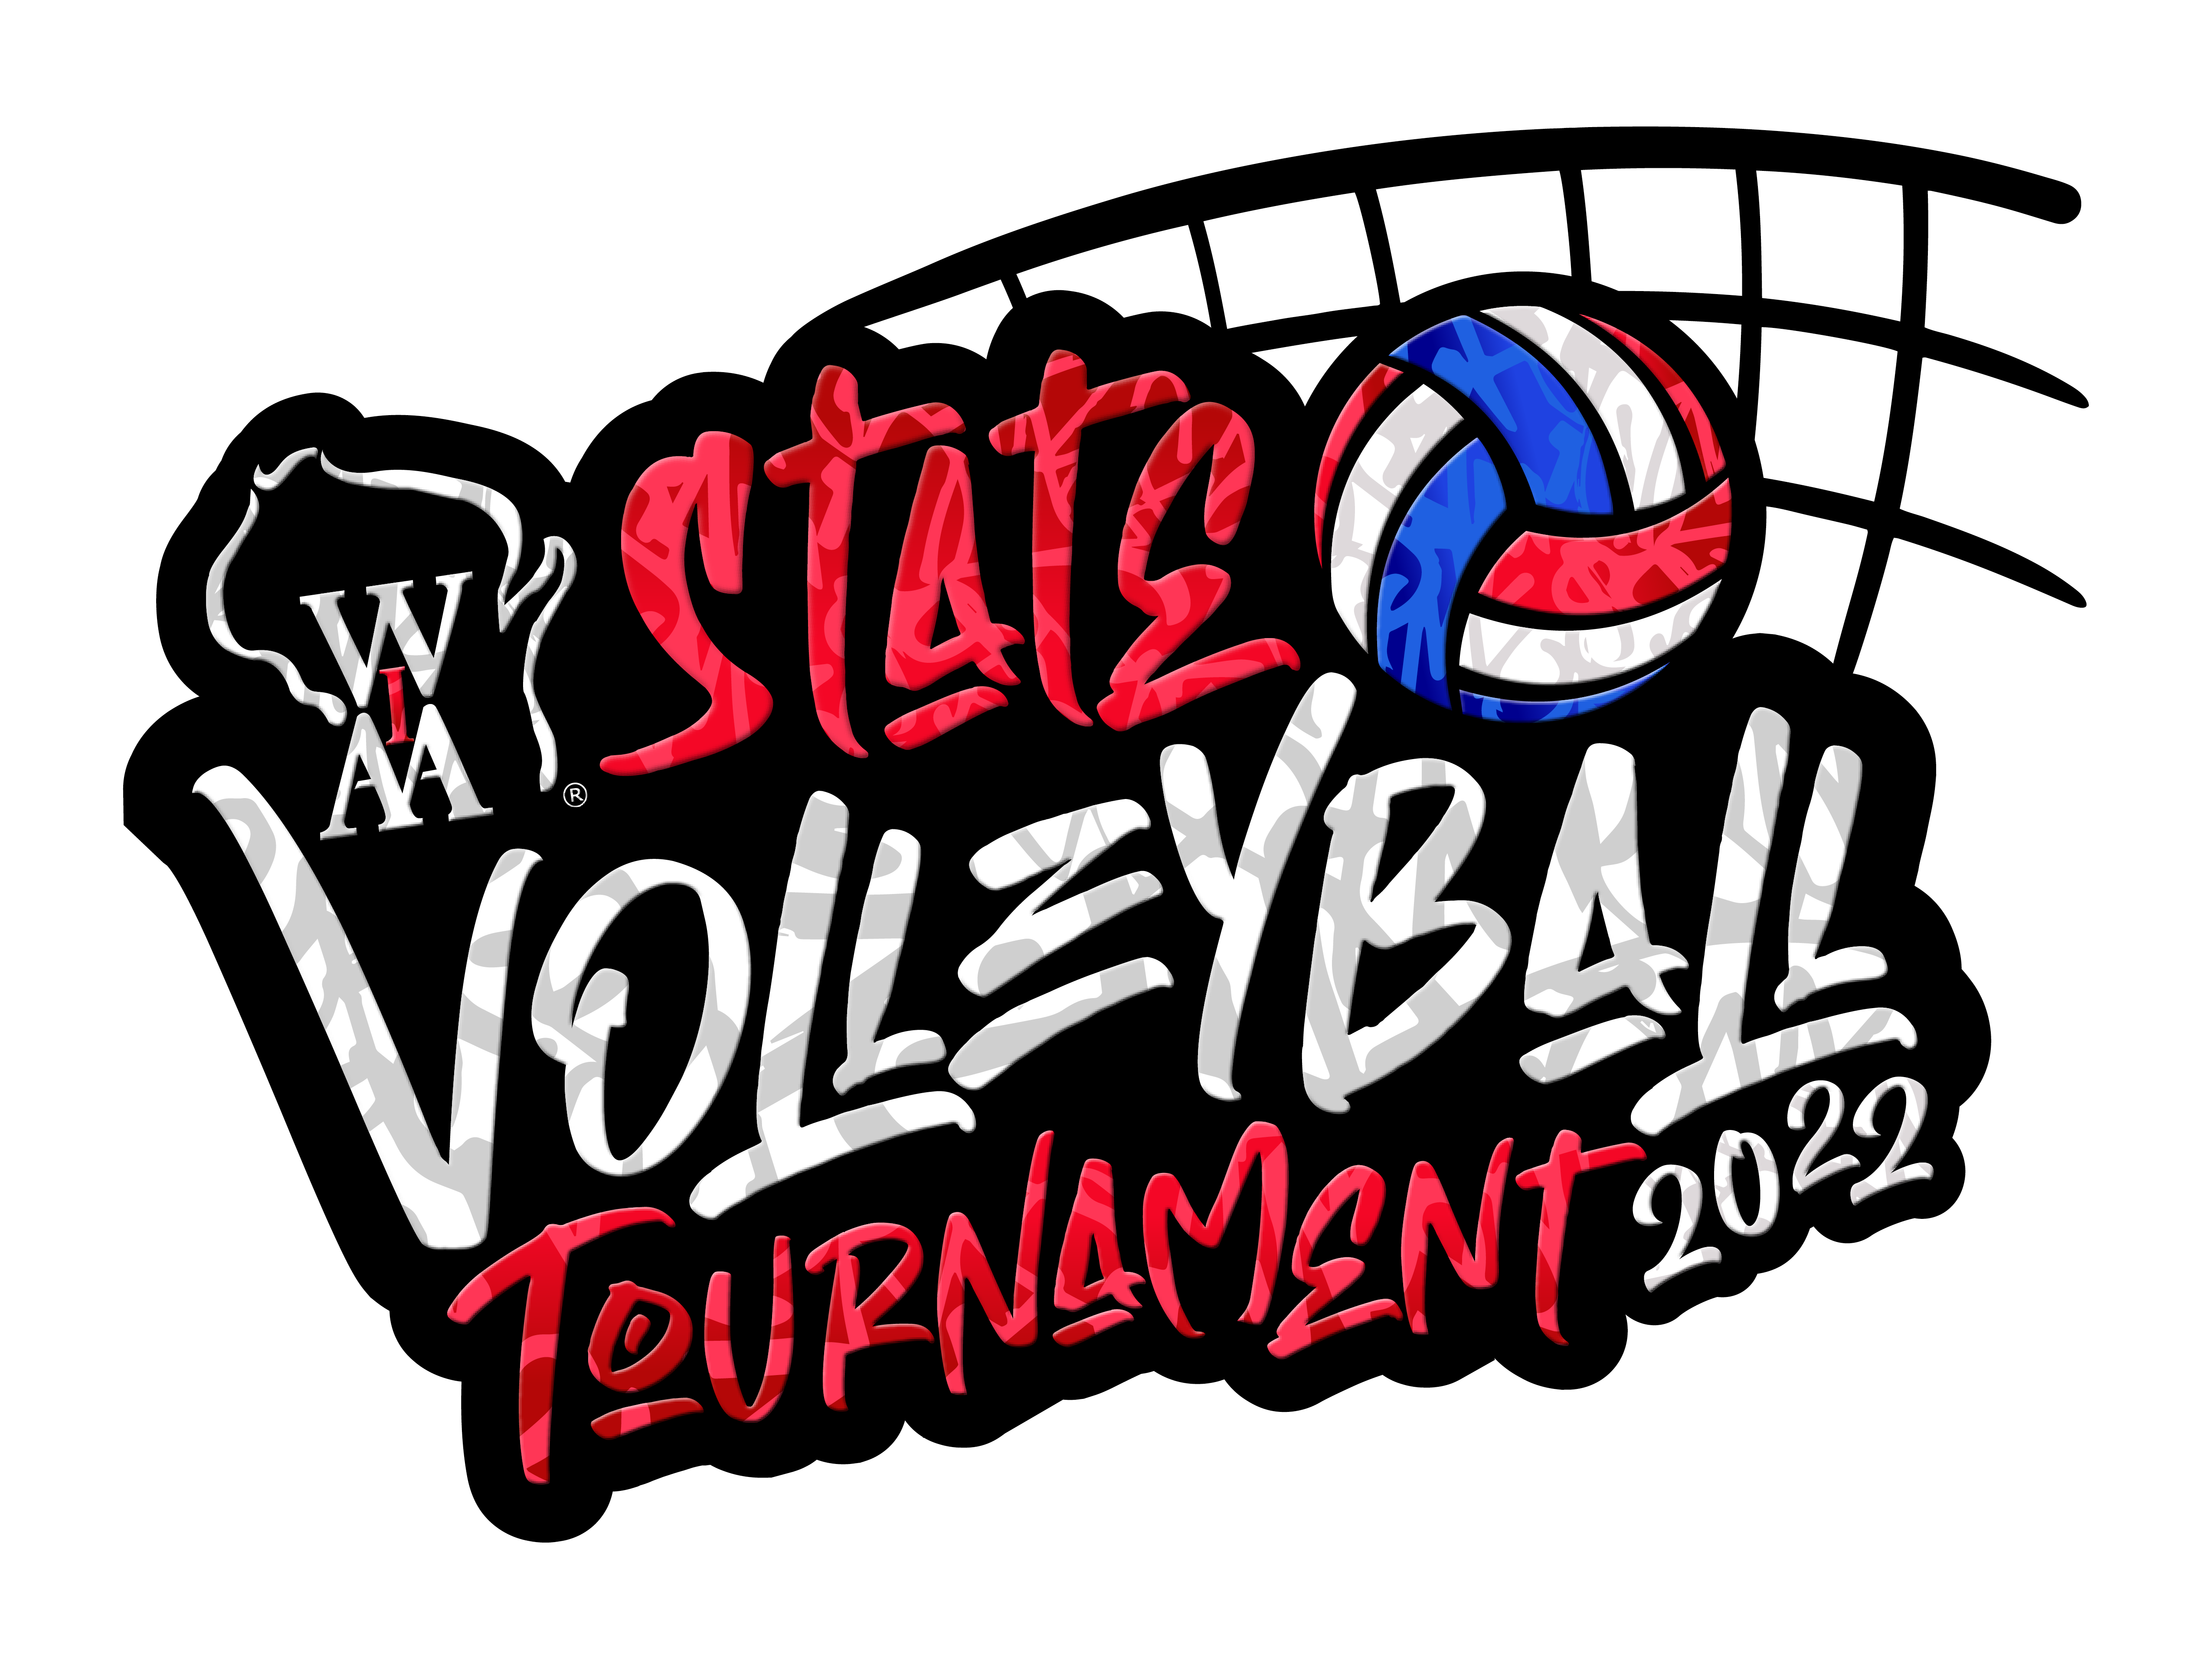 Five Earn the Title of Champion at State Volleyball Tournament